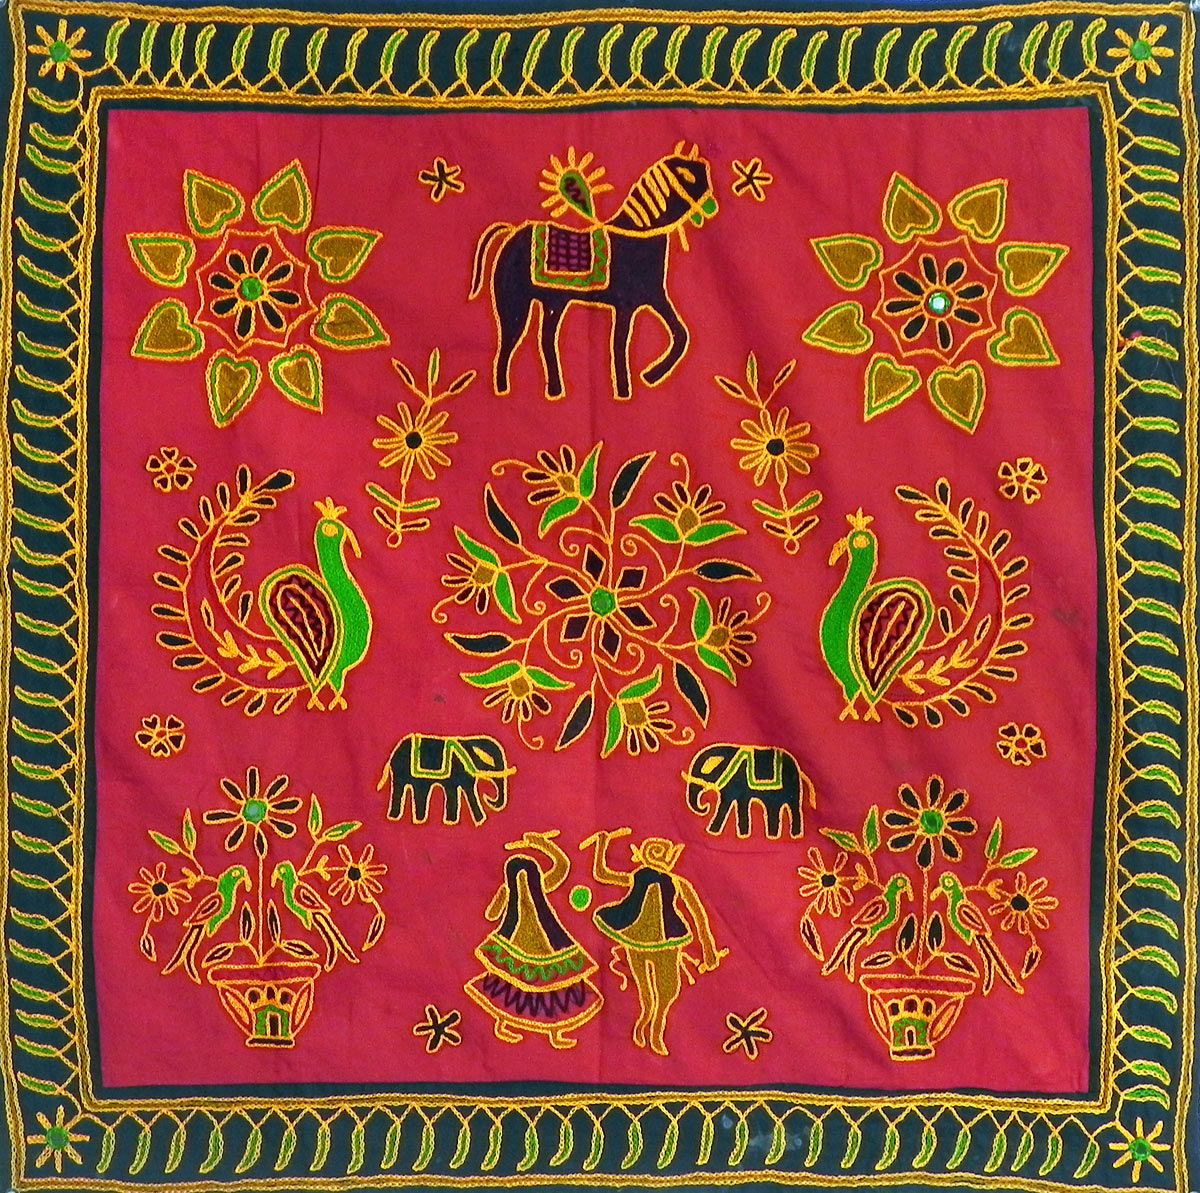 Embroidered Maroon Cloth with Black Border Depicting Folk Dancers, Animals,  Flowers and Rangoli Design - (Wall Hanging)